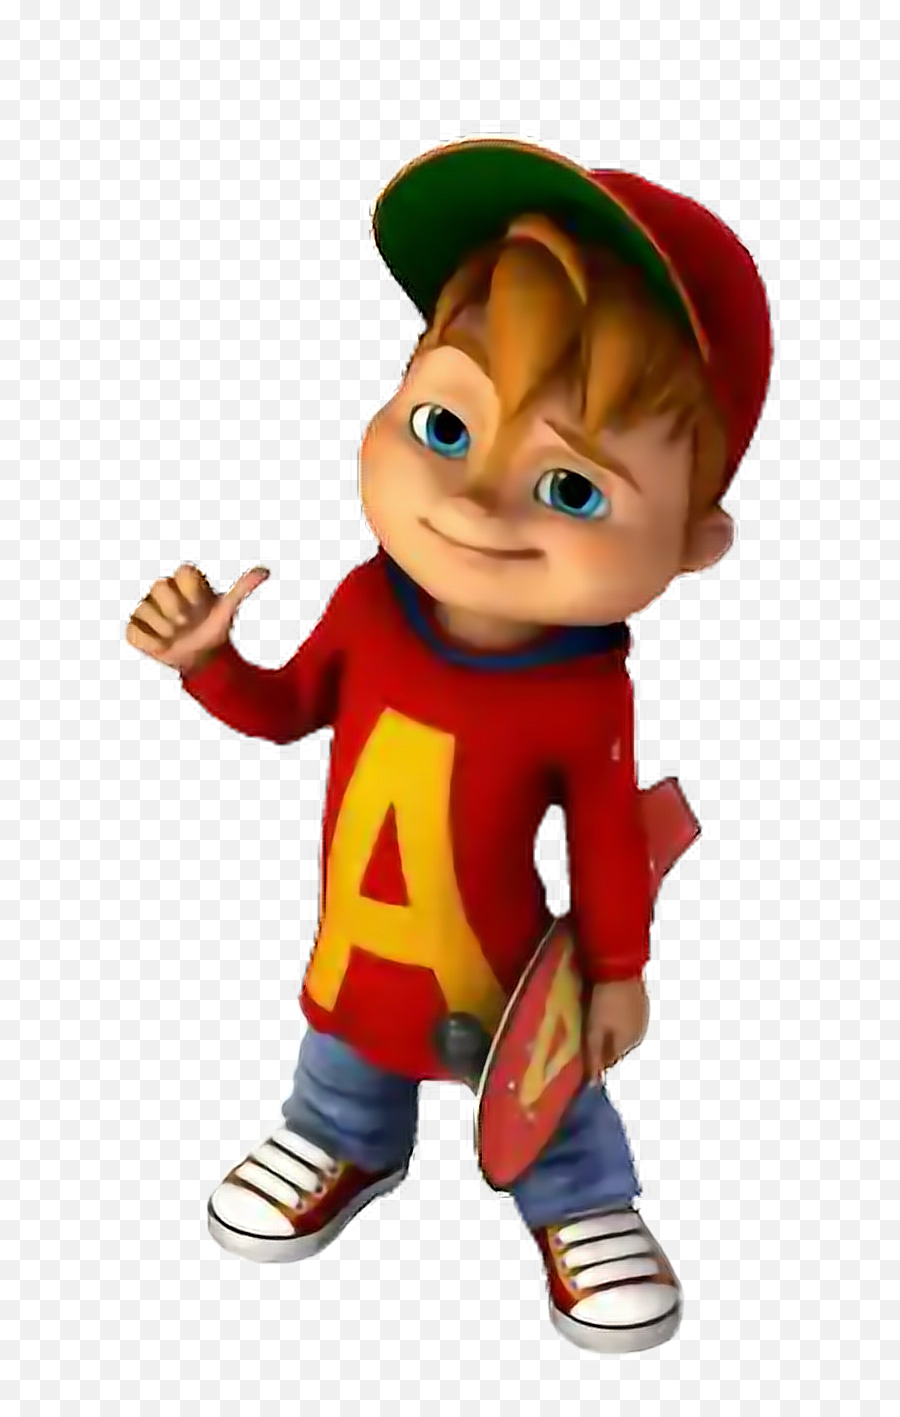 Alvin - Alvin And The Chipmunks Nickelodeon Alvin Png,Alvin Png